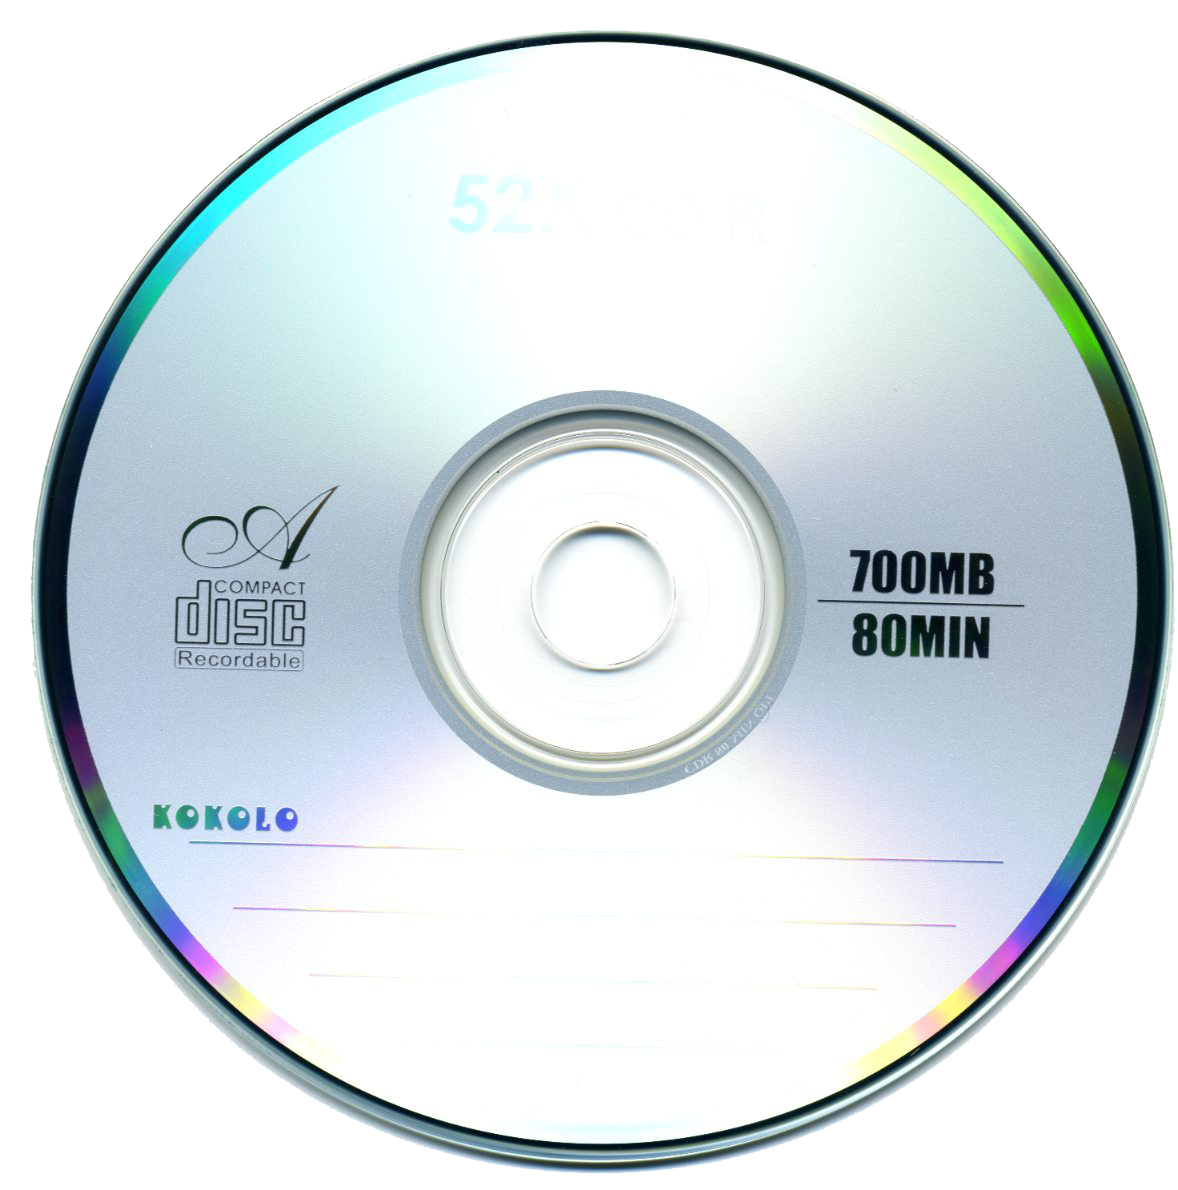 compact dvd disk png image logo #6297